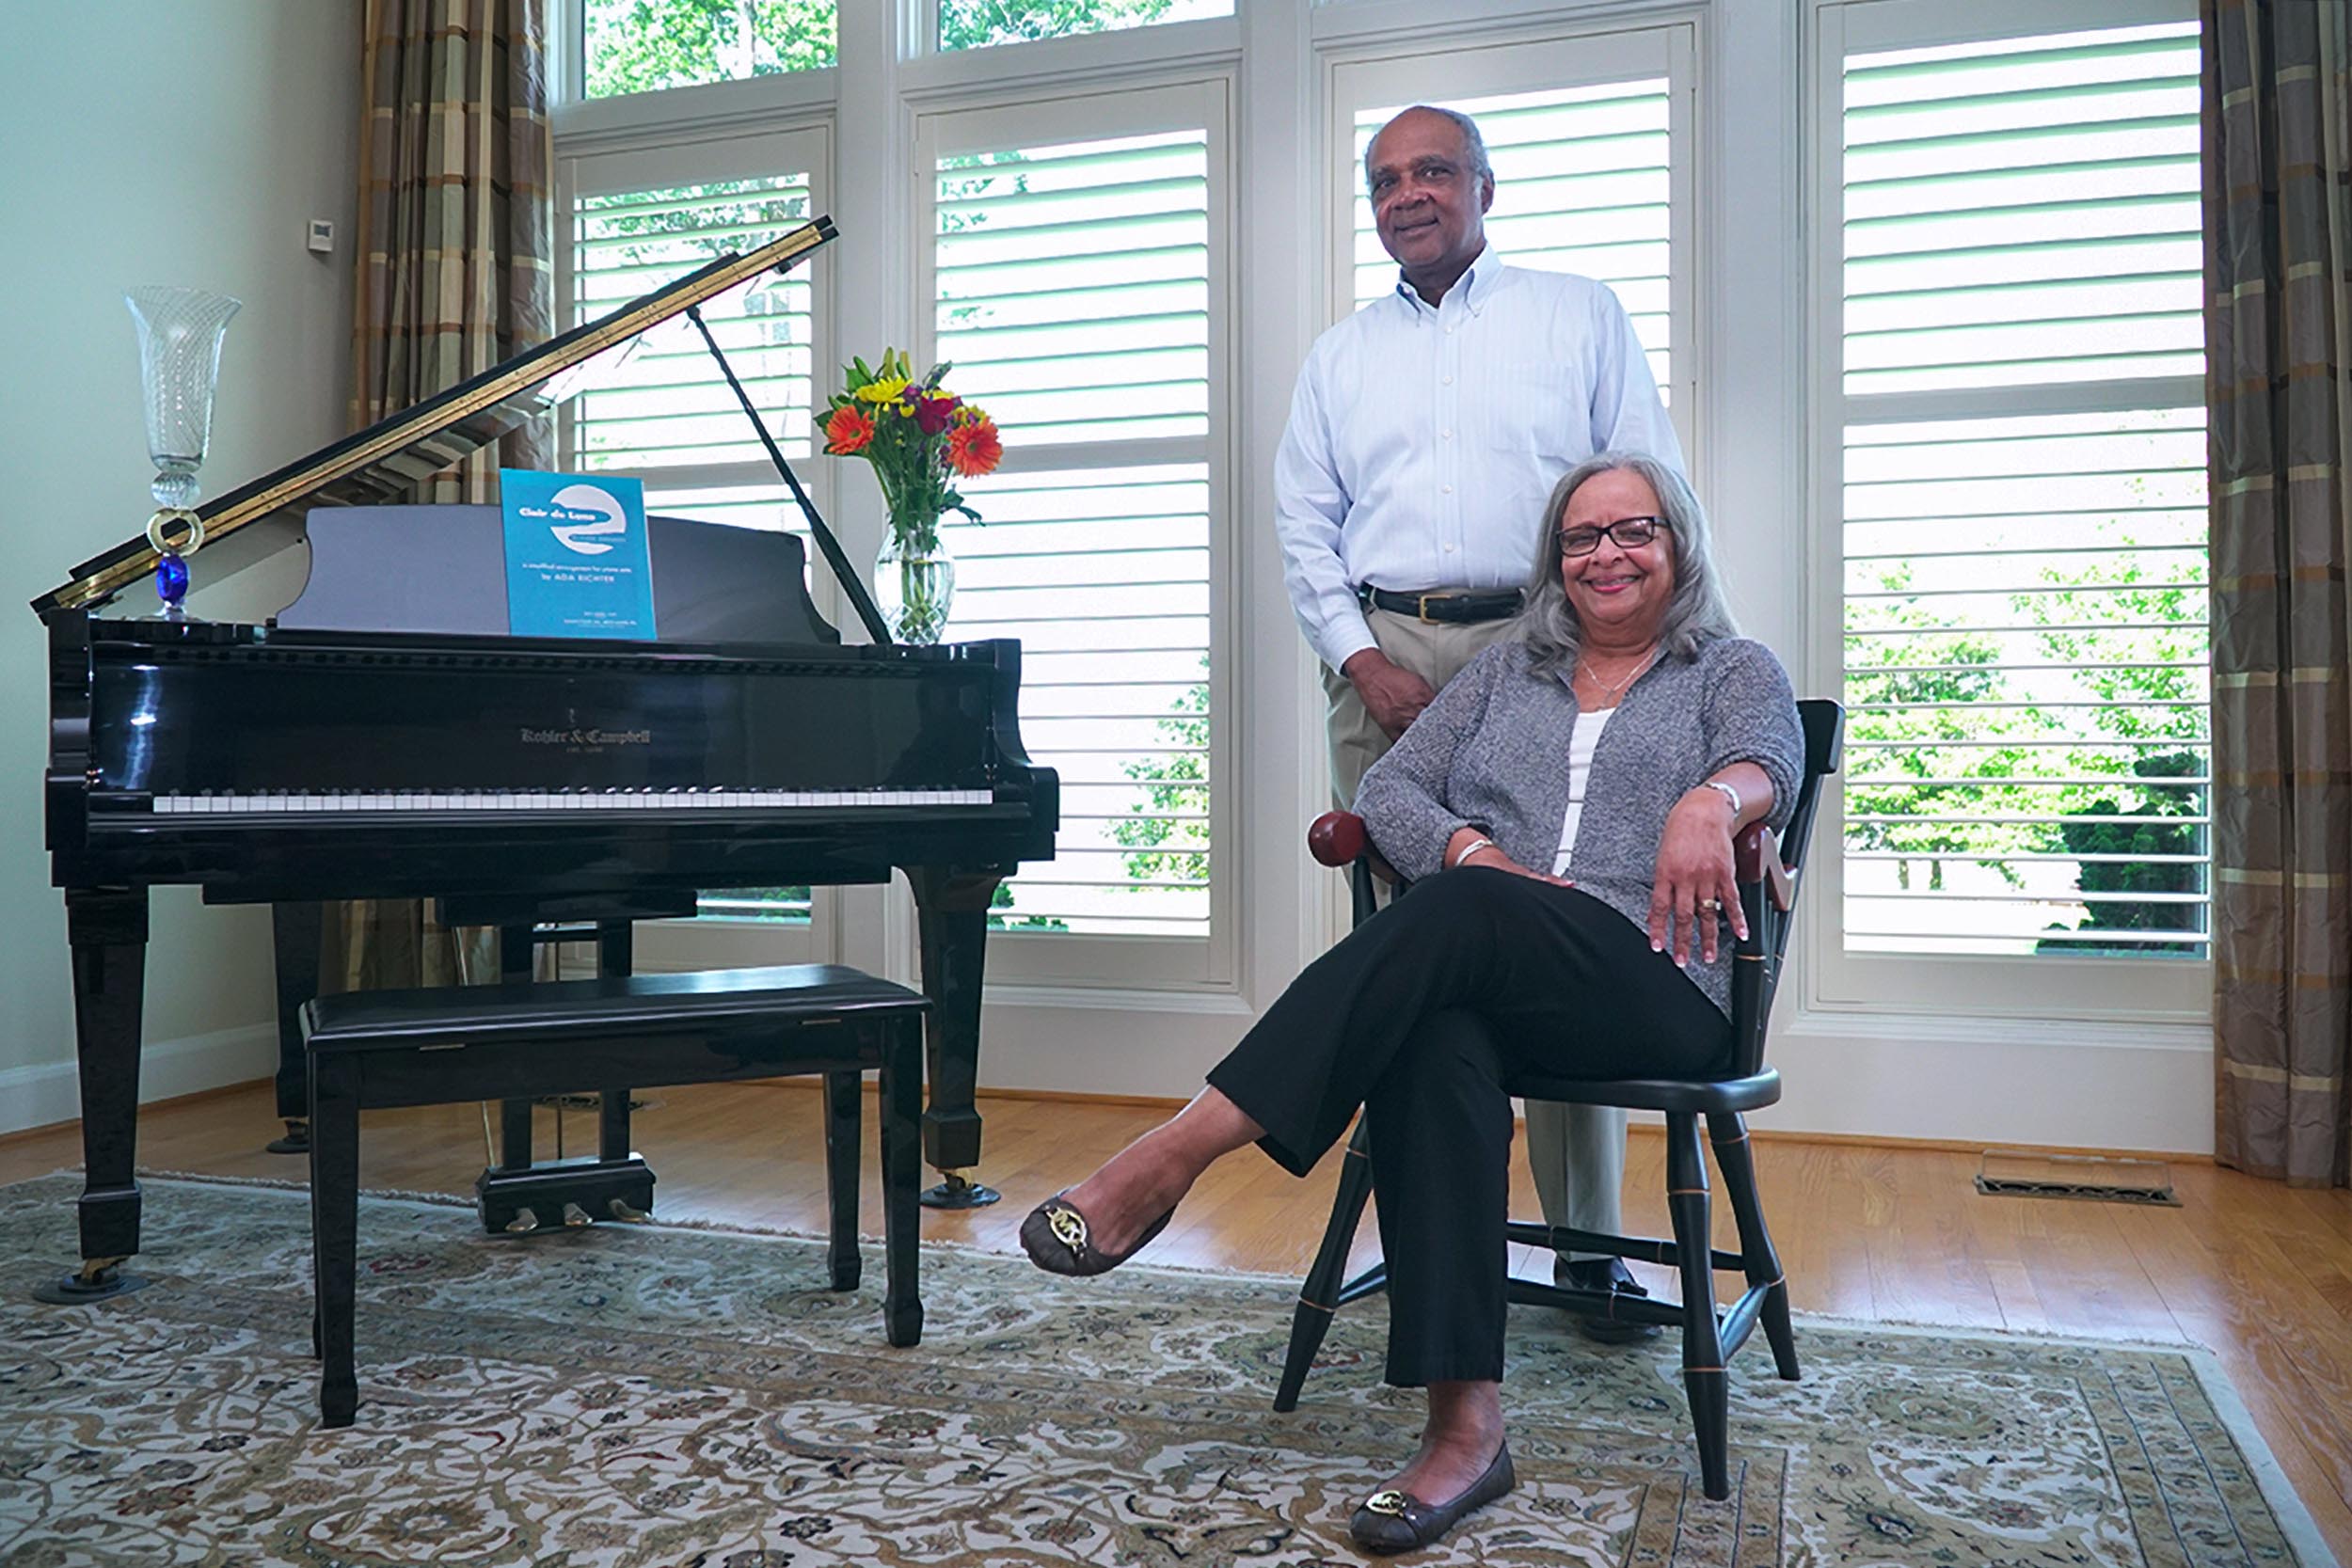 Sandra and Lemuel Lewis, pose next to a piano together